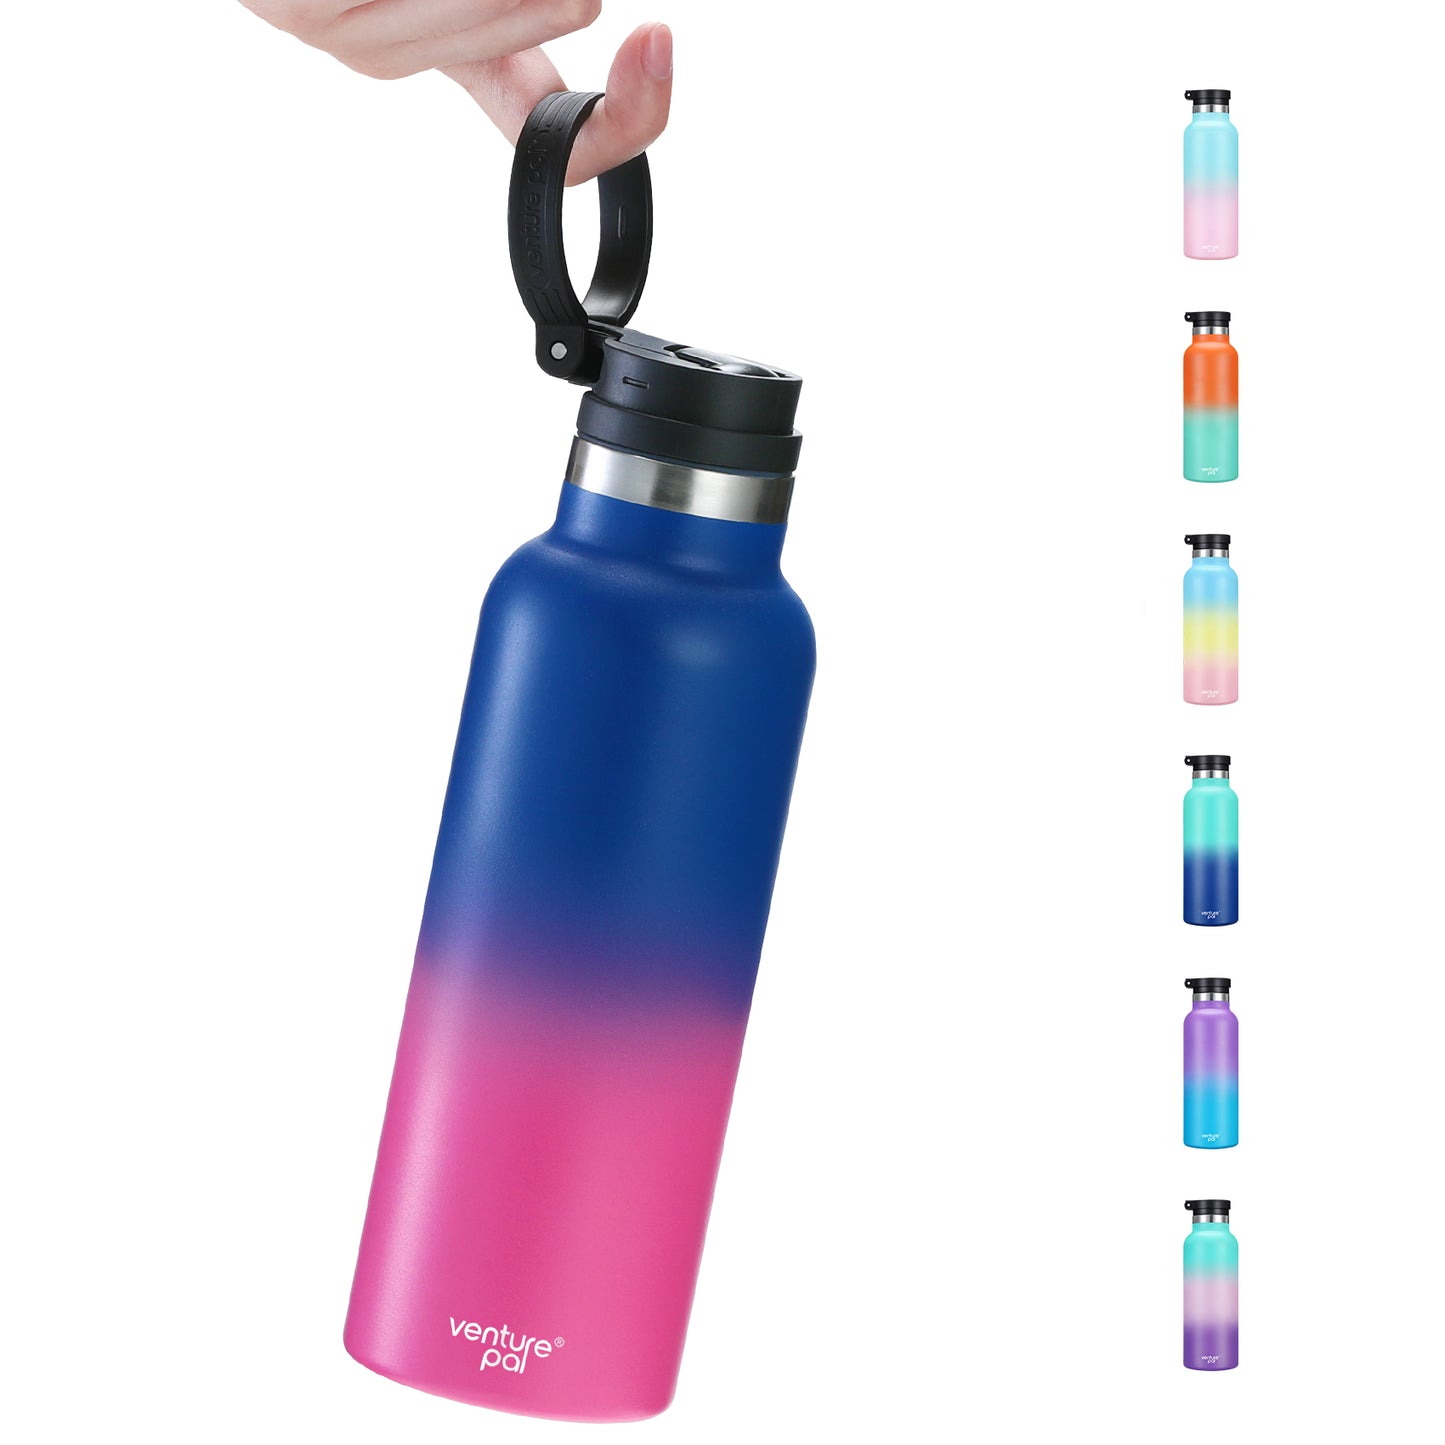 Venture Pal 17oz Vacuum Insulated Water Bottle with Straw Lid & Portable Carrying Handle - Comes with a Complimentary Cleaning Brush and Straw Brush